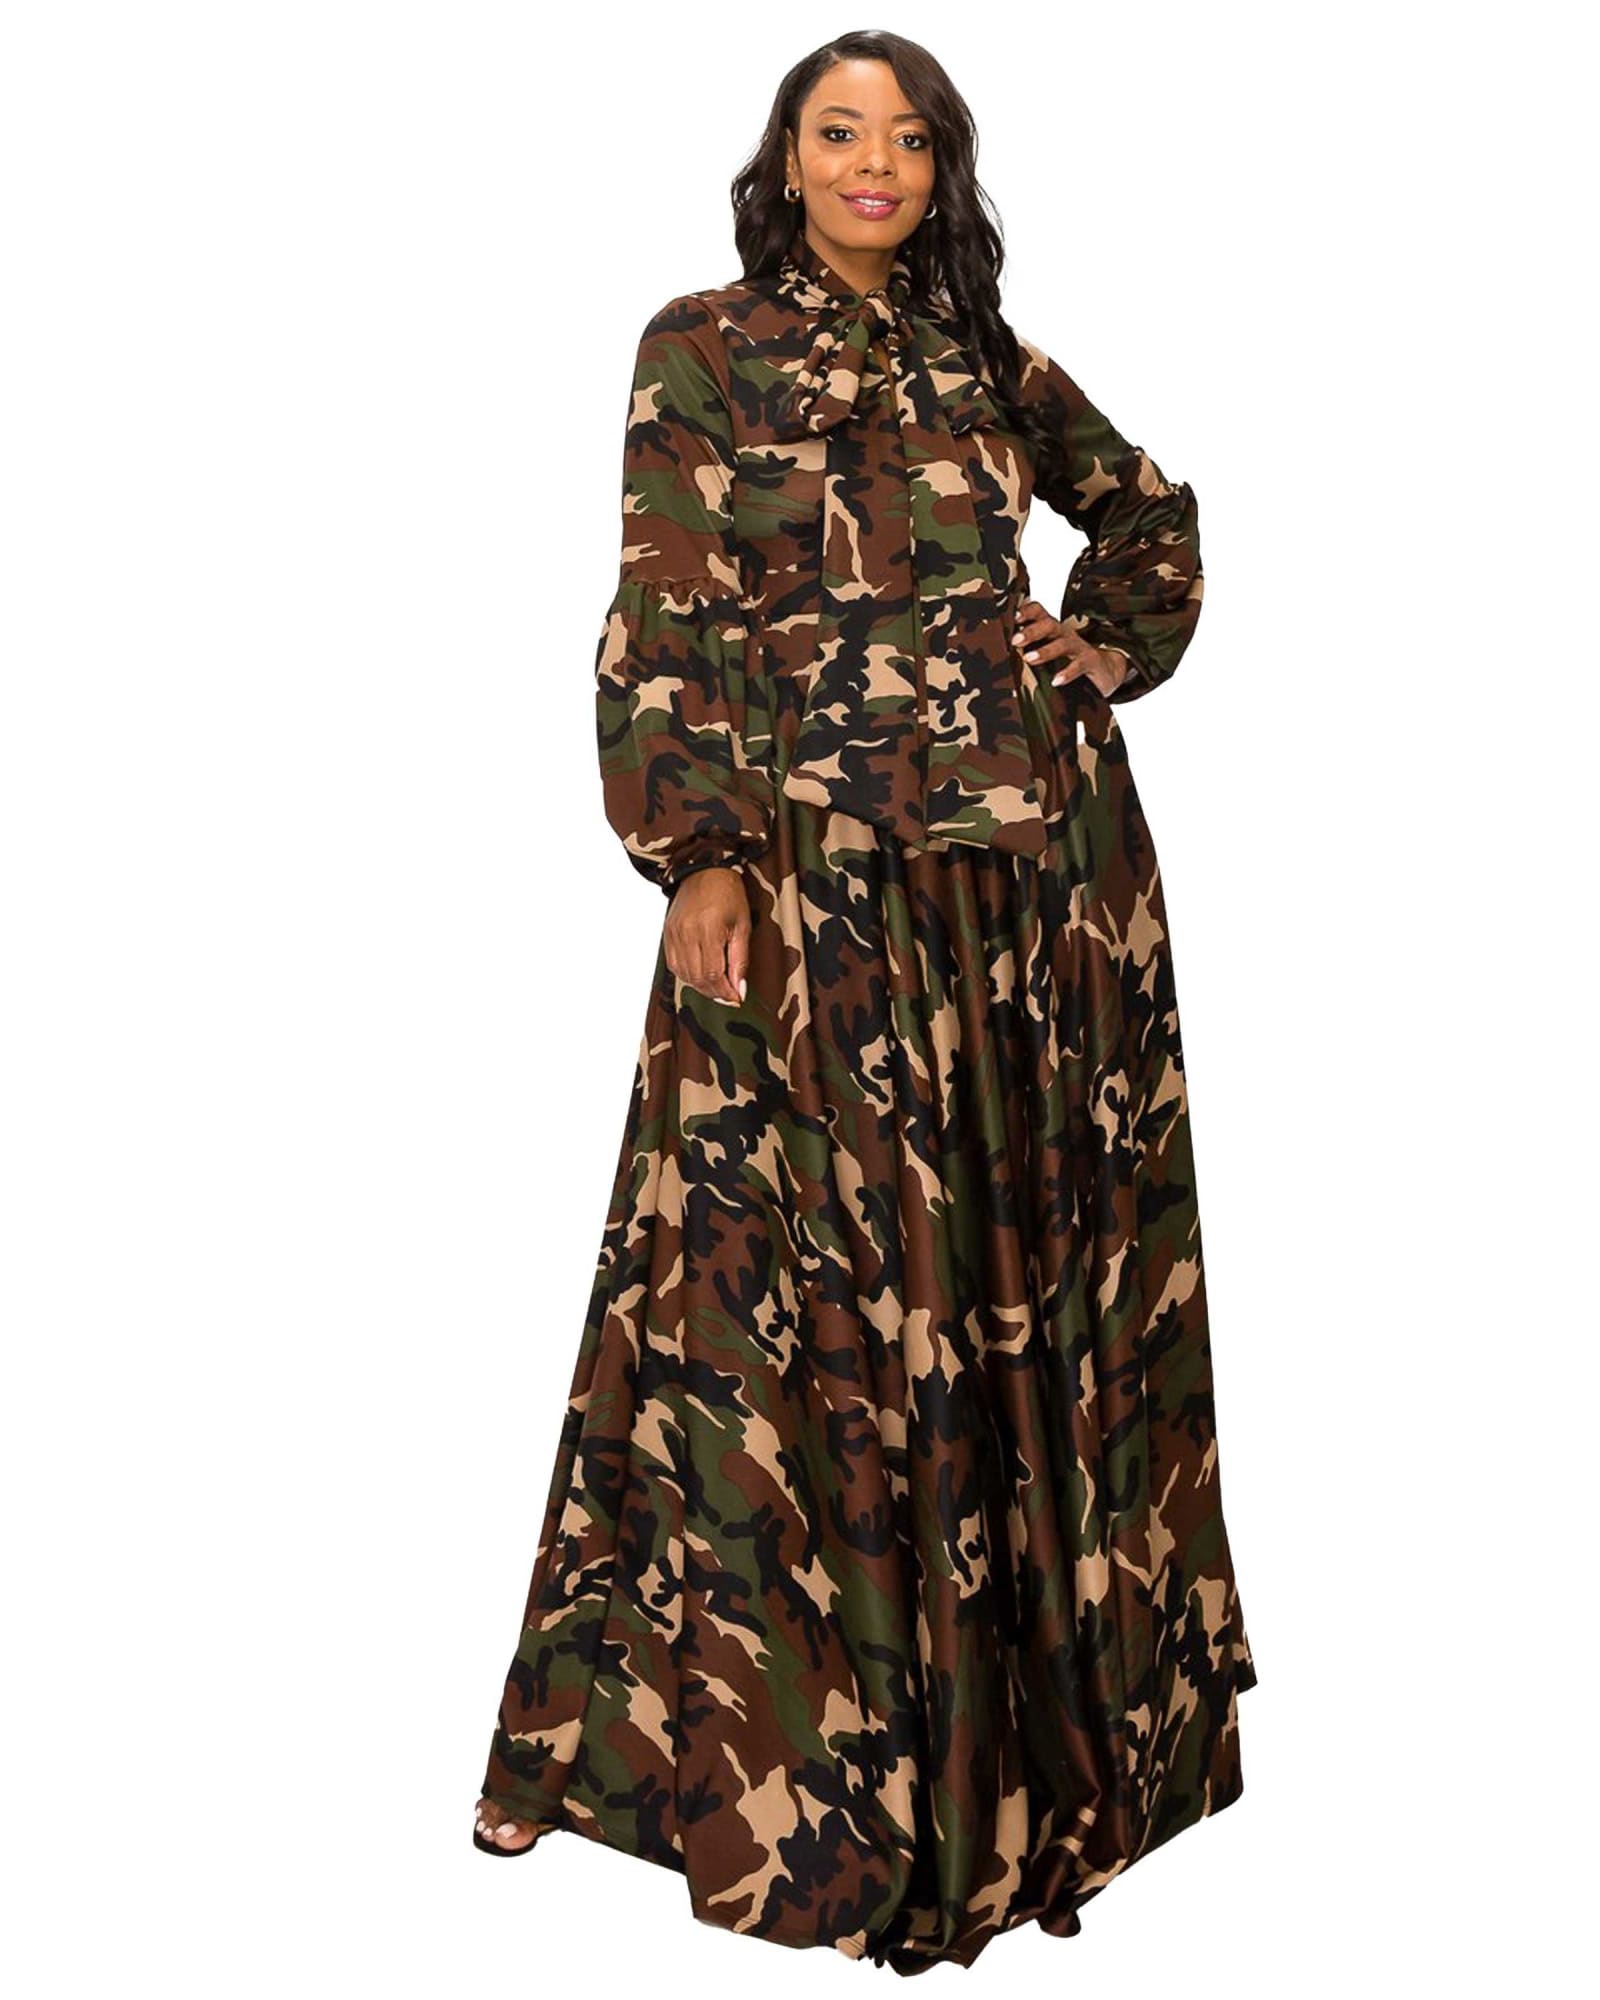 Camo Bella Donna Dress with Ribbon and Puffed Out Sleeves | Camo